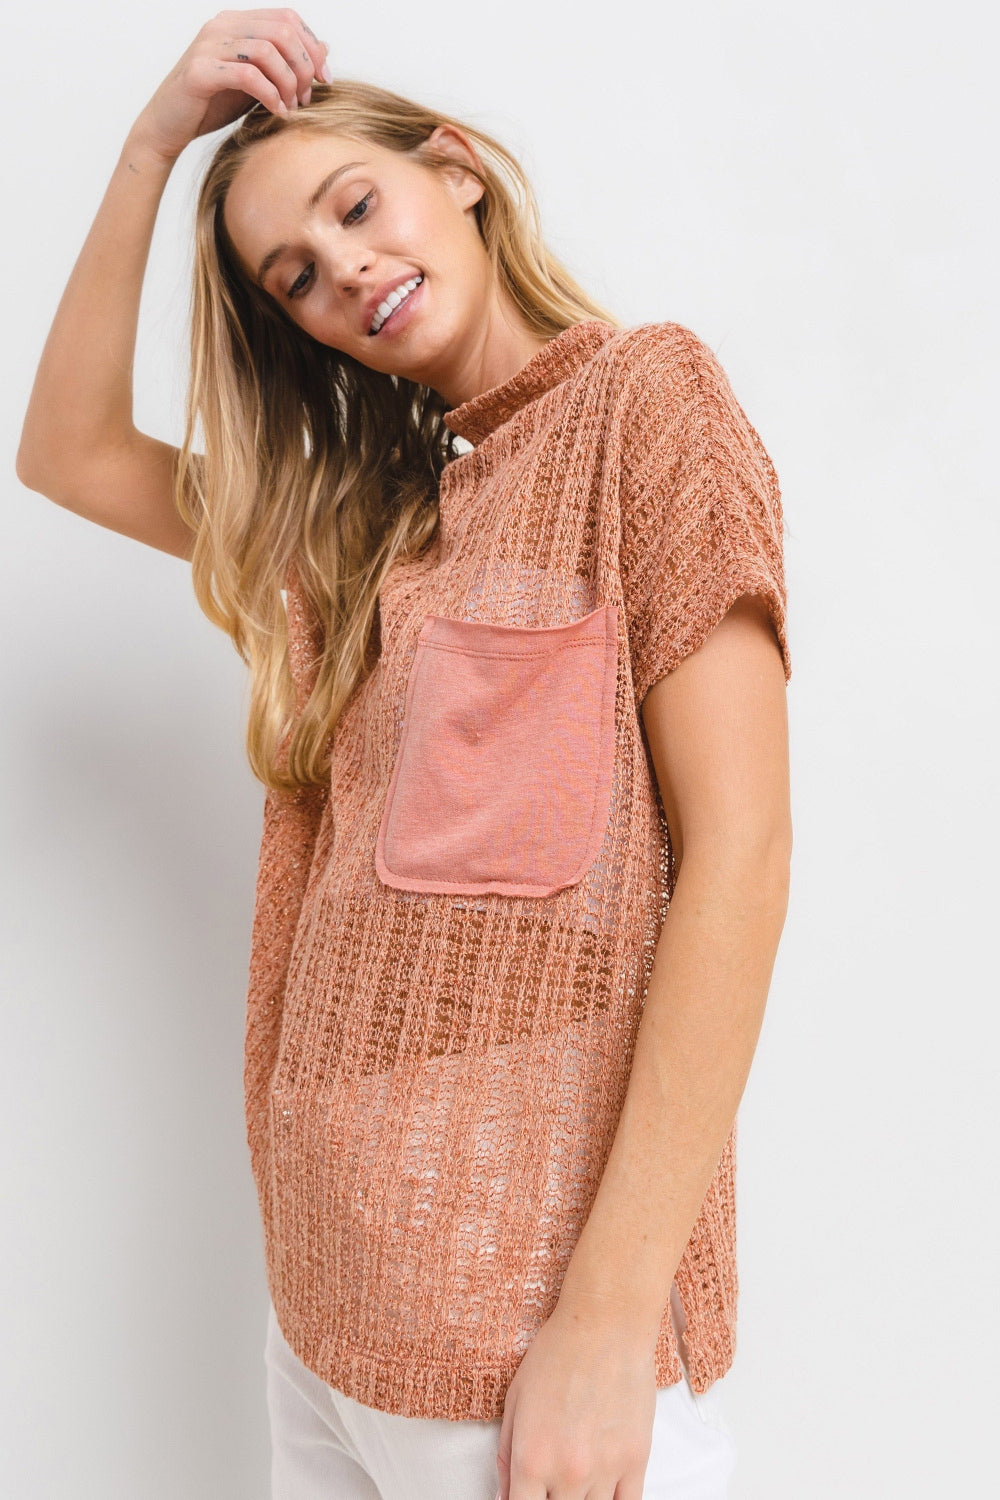 The See Through Crochet Mock Neck Cover Up is a stylish and versatile addition to your wardrobe. Perfect for layering over a swimsuit or pairing with a camisole for a boho-chic look. The intricate crochet detailing adds a touch of texture and visual interest. S-L